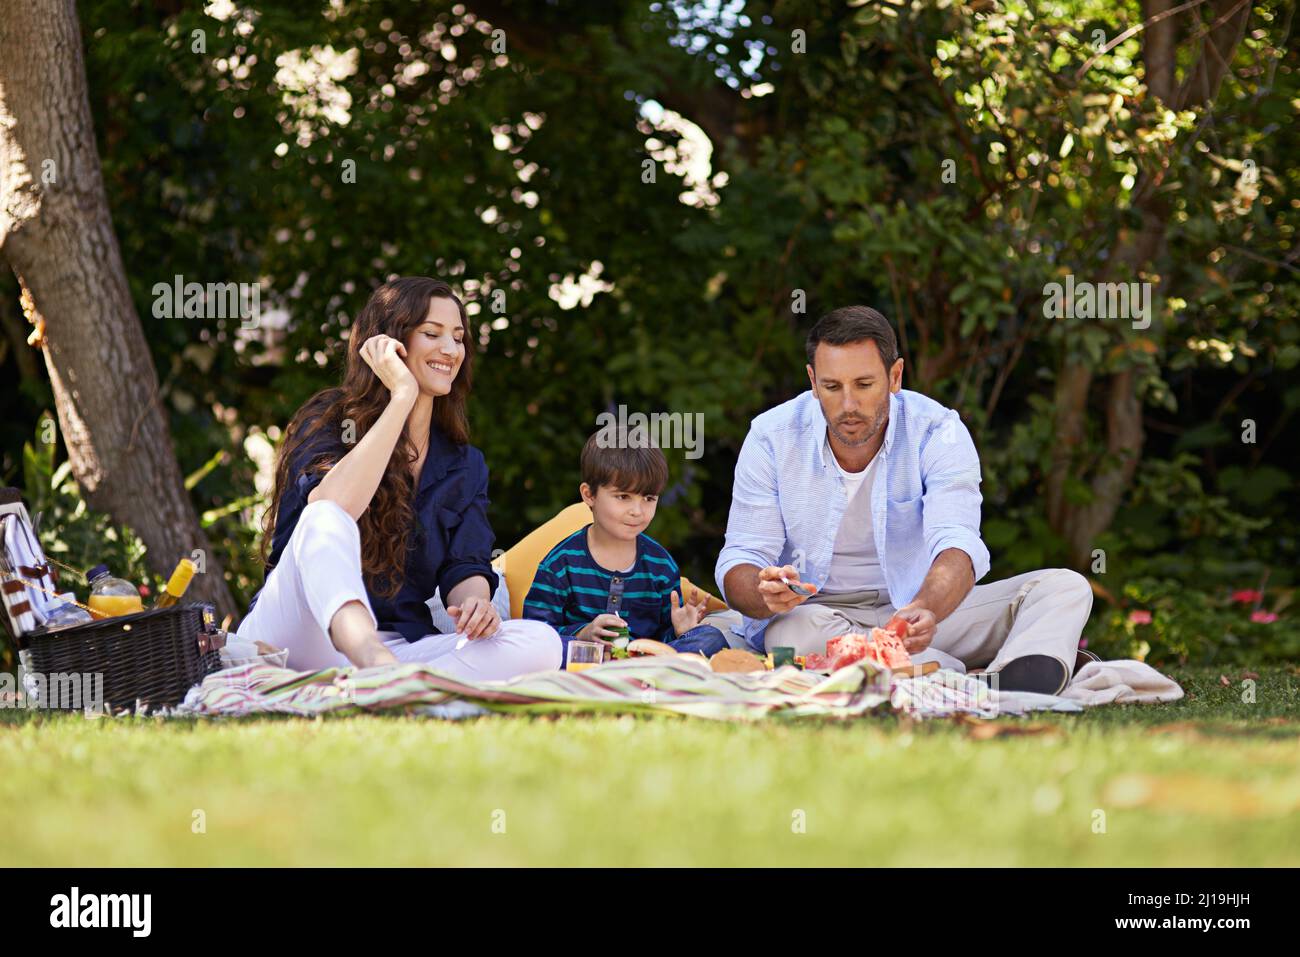 Picnics were made for summer. Shot of a family enjoying a picnic together. Stock Photo